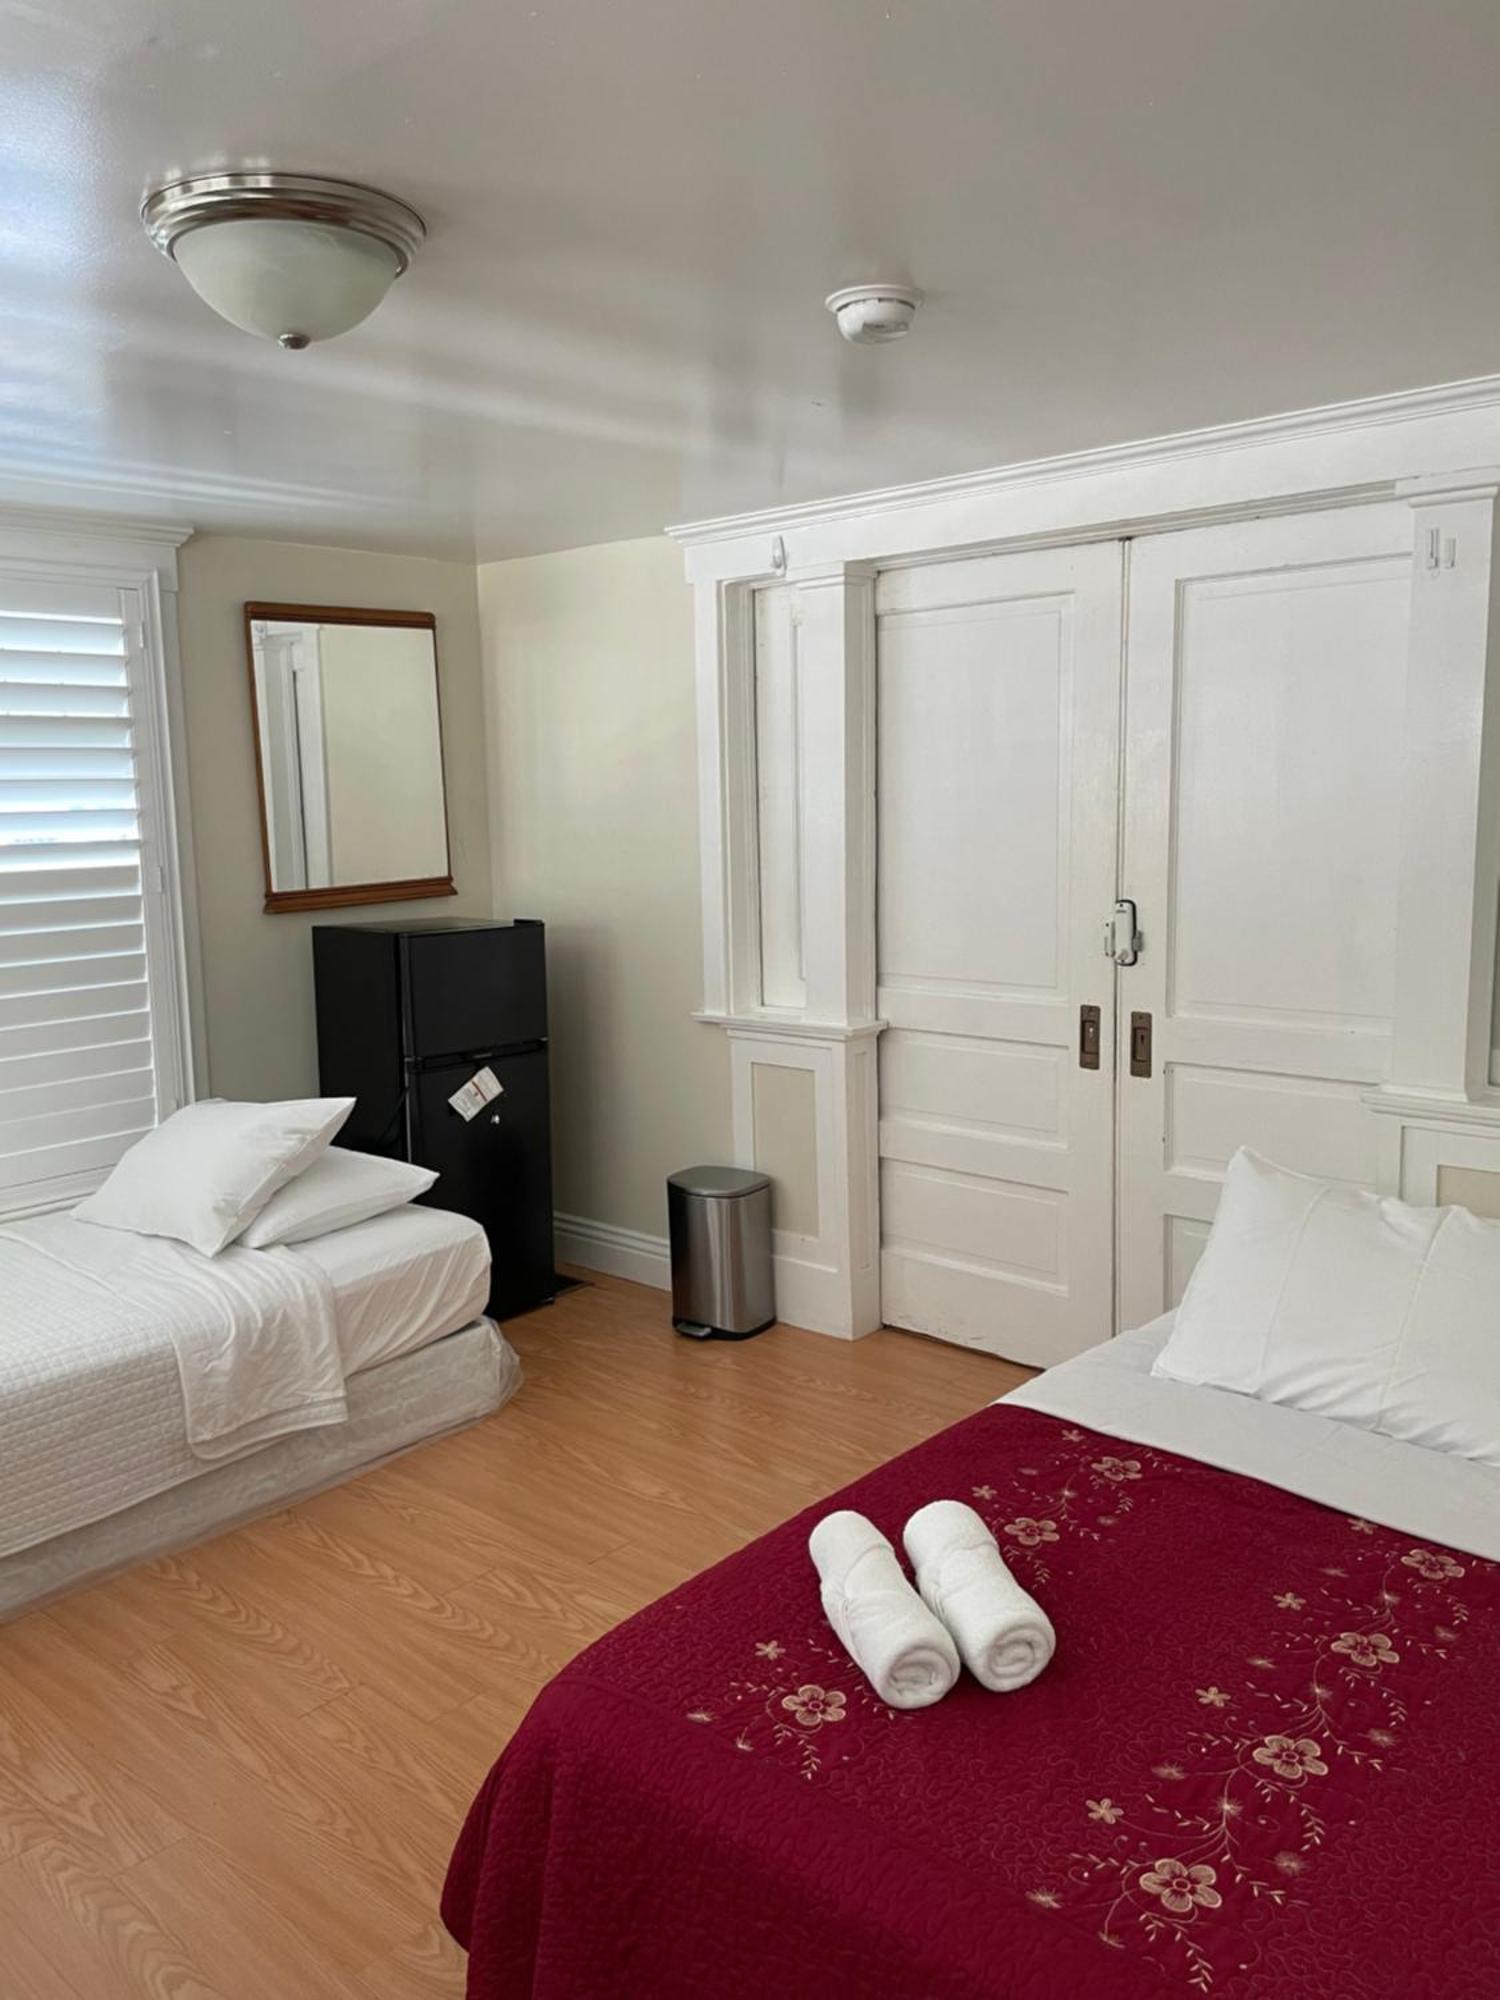 Spacious Private Los Angeles Bedroom With Ac & Wifi & Private Fridge Near Usc The Coliseum Exposition Park Bmo Stadium University Of Southern California Zewnętrze zdjęcie